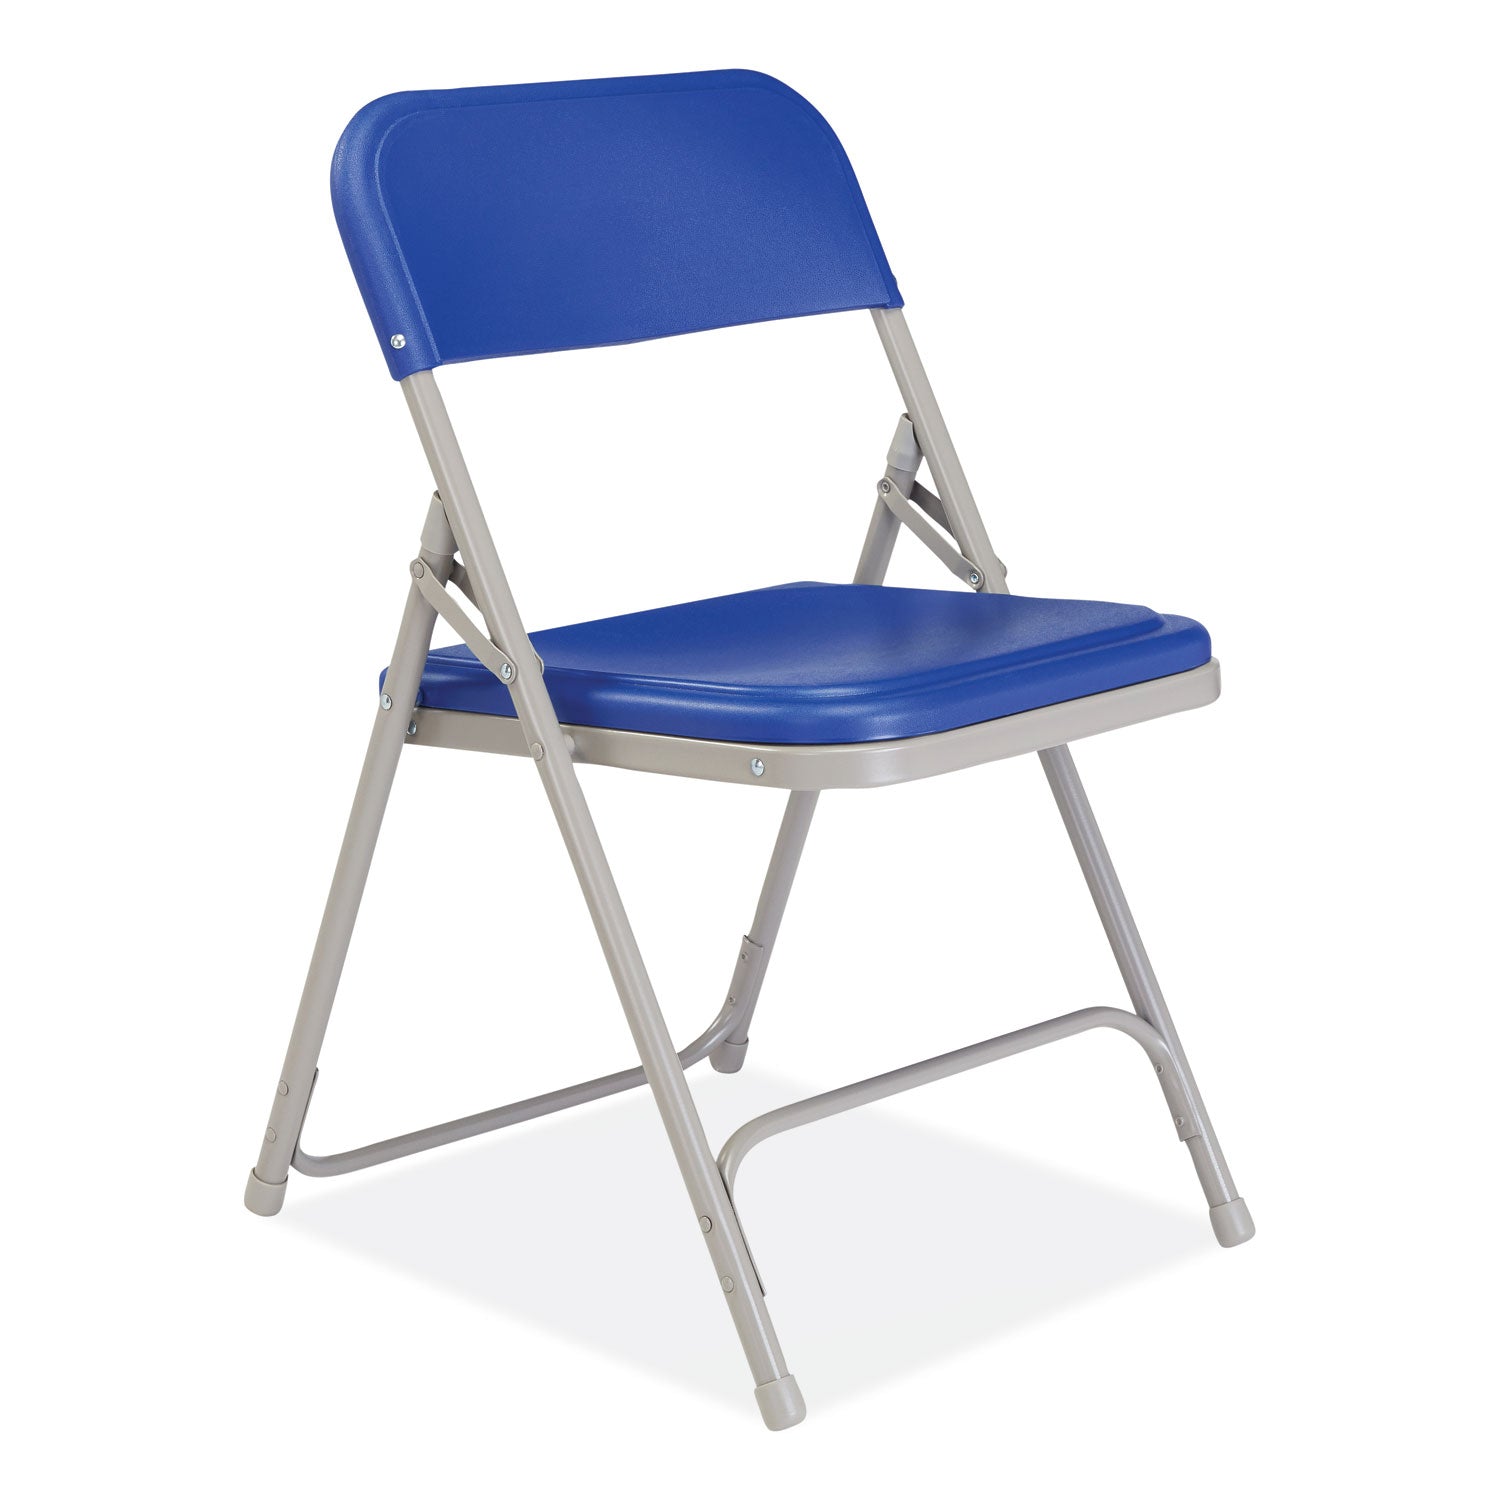 800-series-premium-plastic-folding-chair-supports-500-lb-18-seat-ht-blue-seat-back-gray-base-4-ctships-in-1-3-bus-days_nps805 - 2